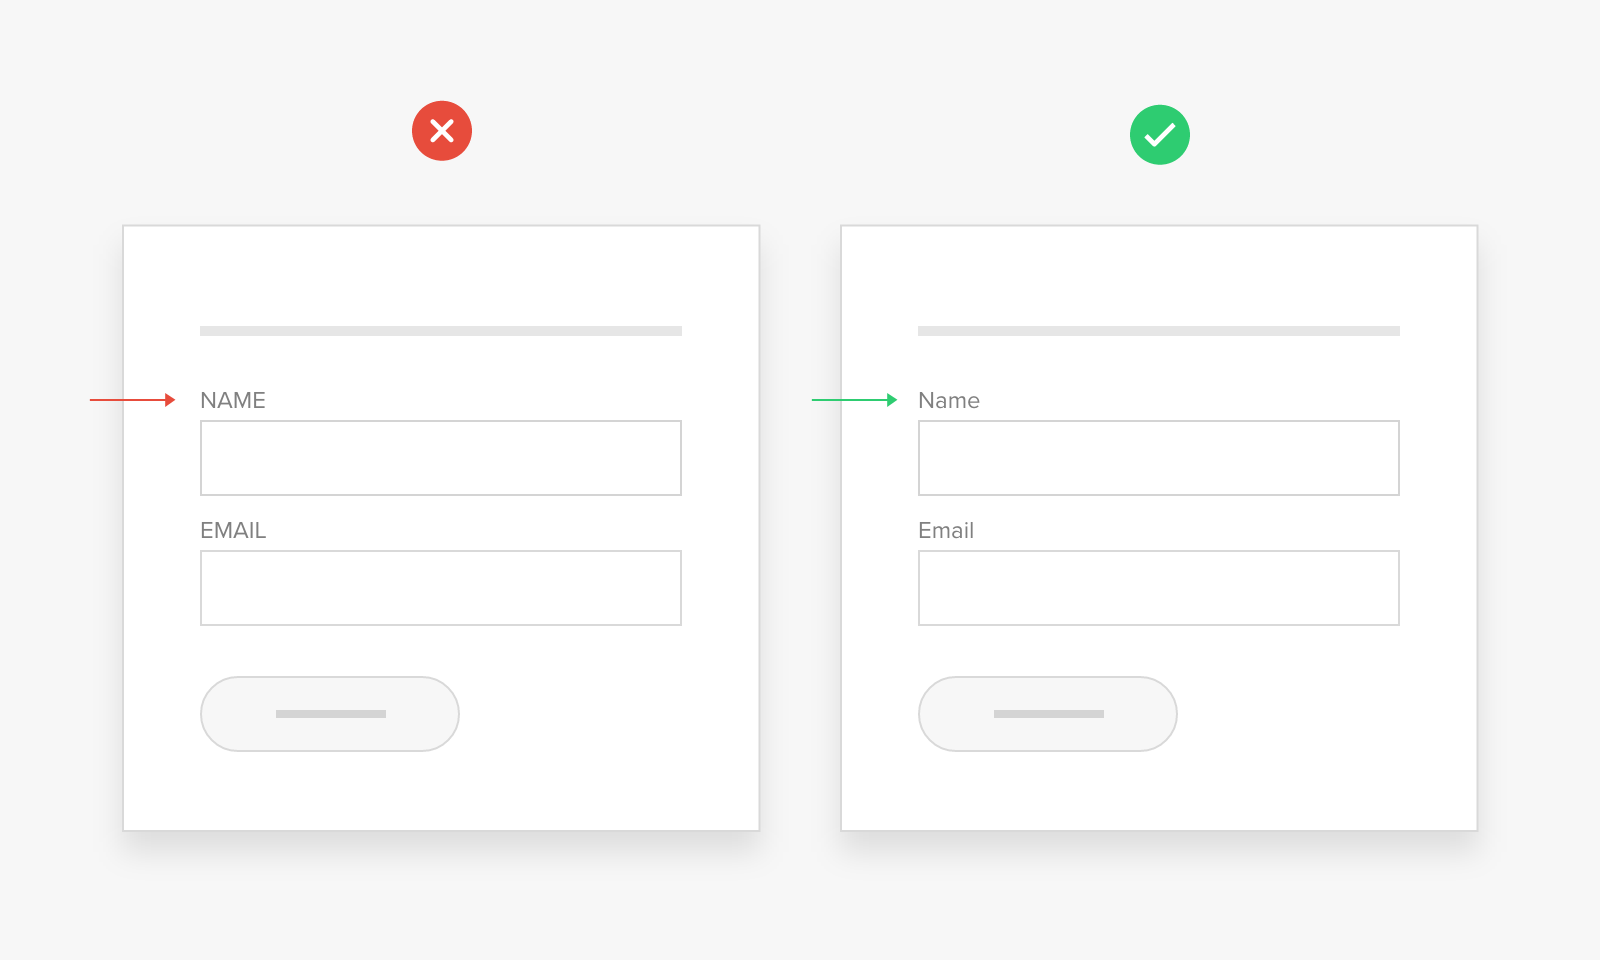 Get More Form Submissions With These Best Practices